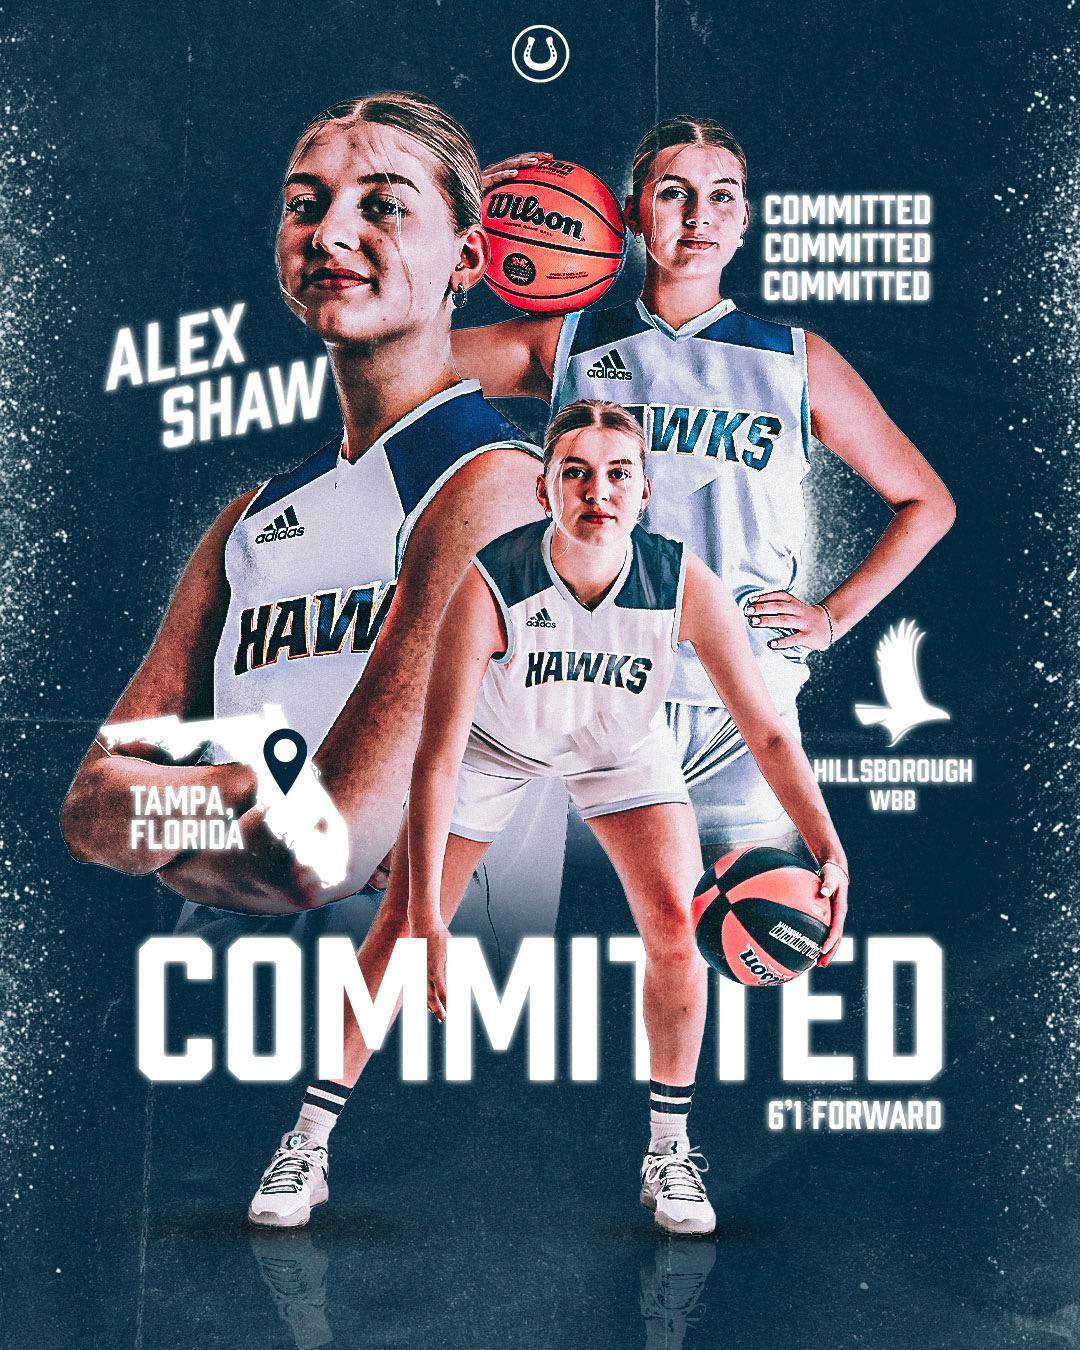 Class of 2023, Alex Shaw commits to Hillsborough Hawks and HCC for the 2023/24 season.